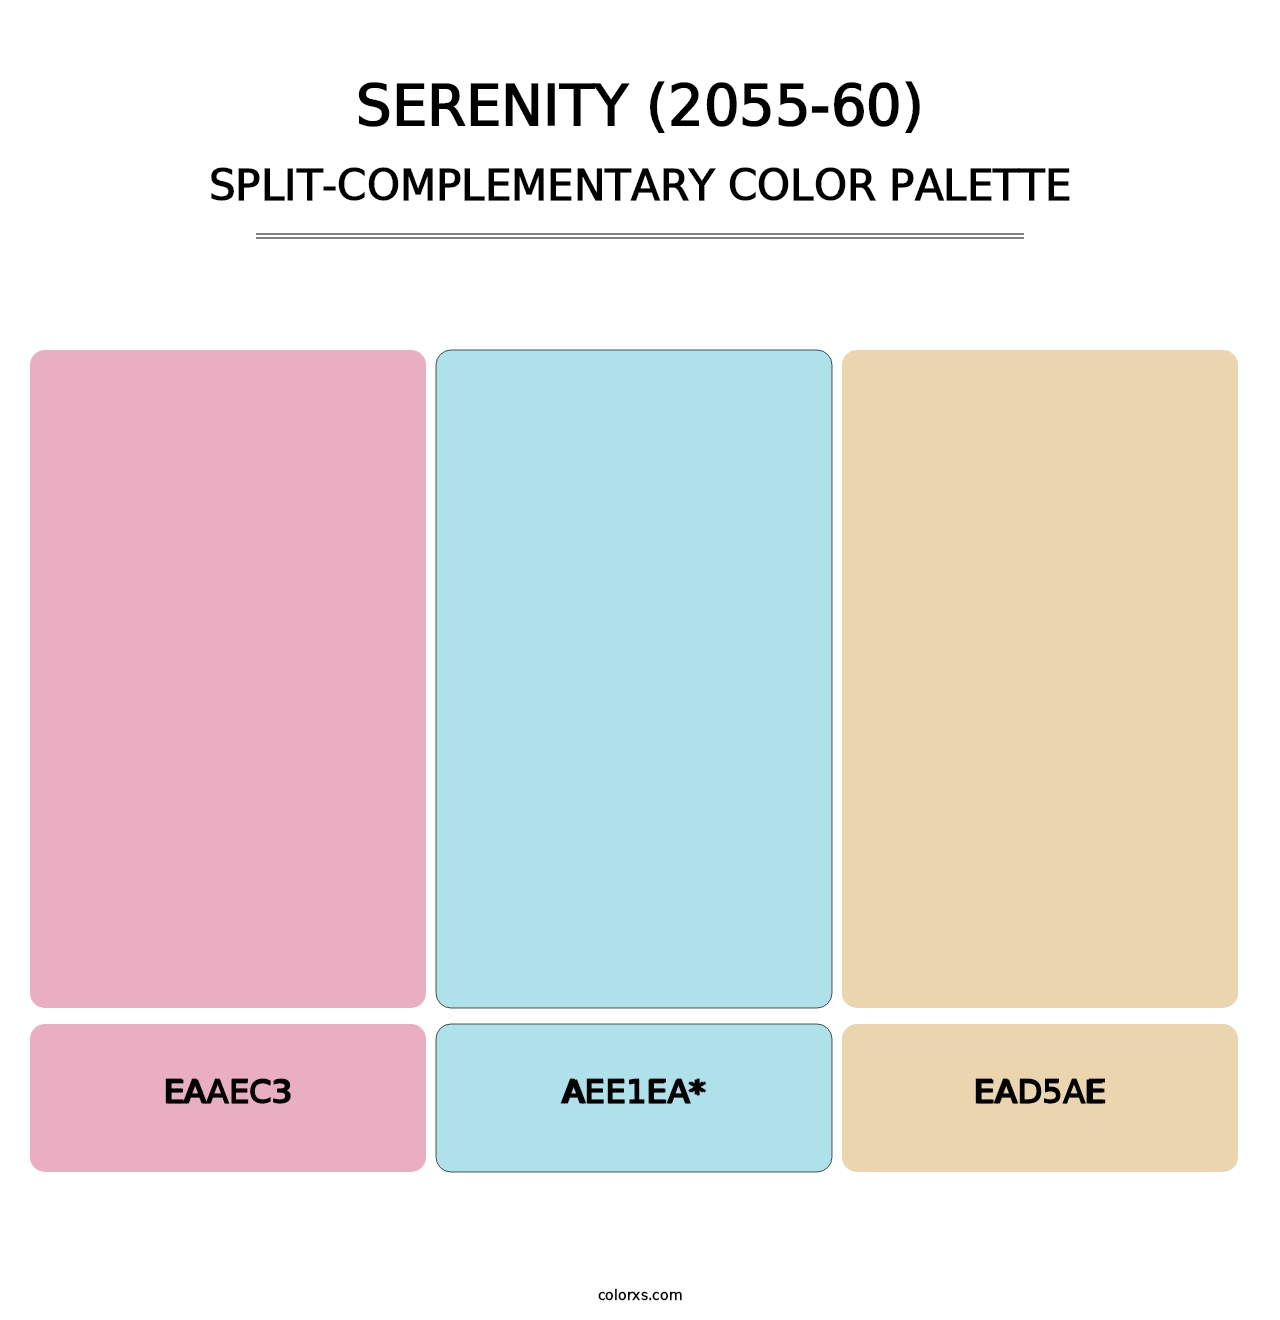 Serenity (2055-60) - Split-Complementary Color Palette